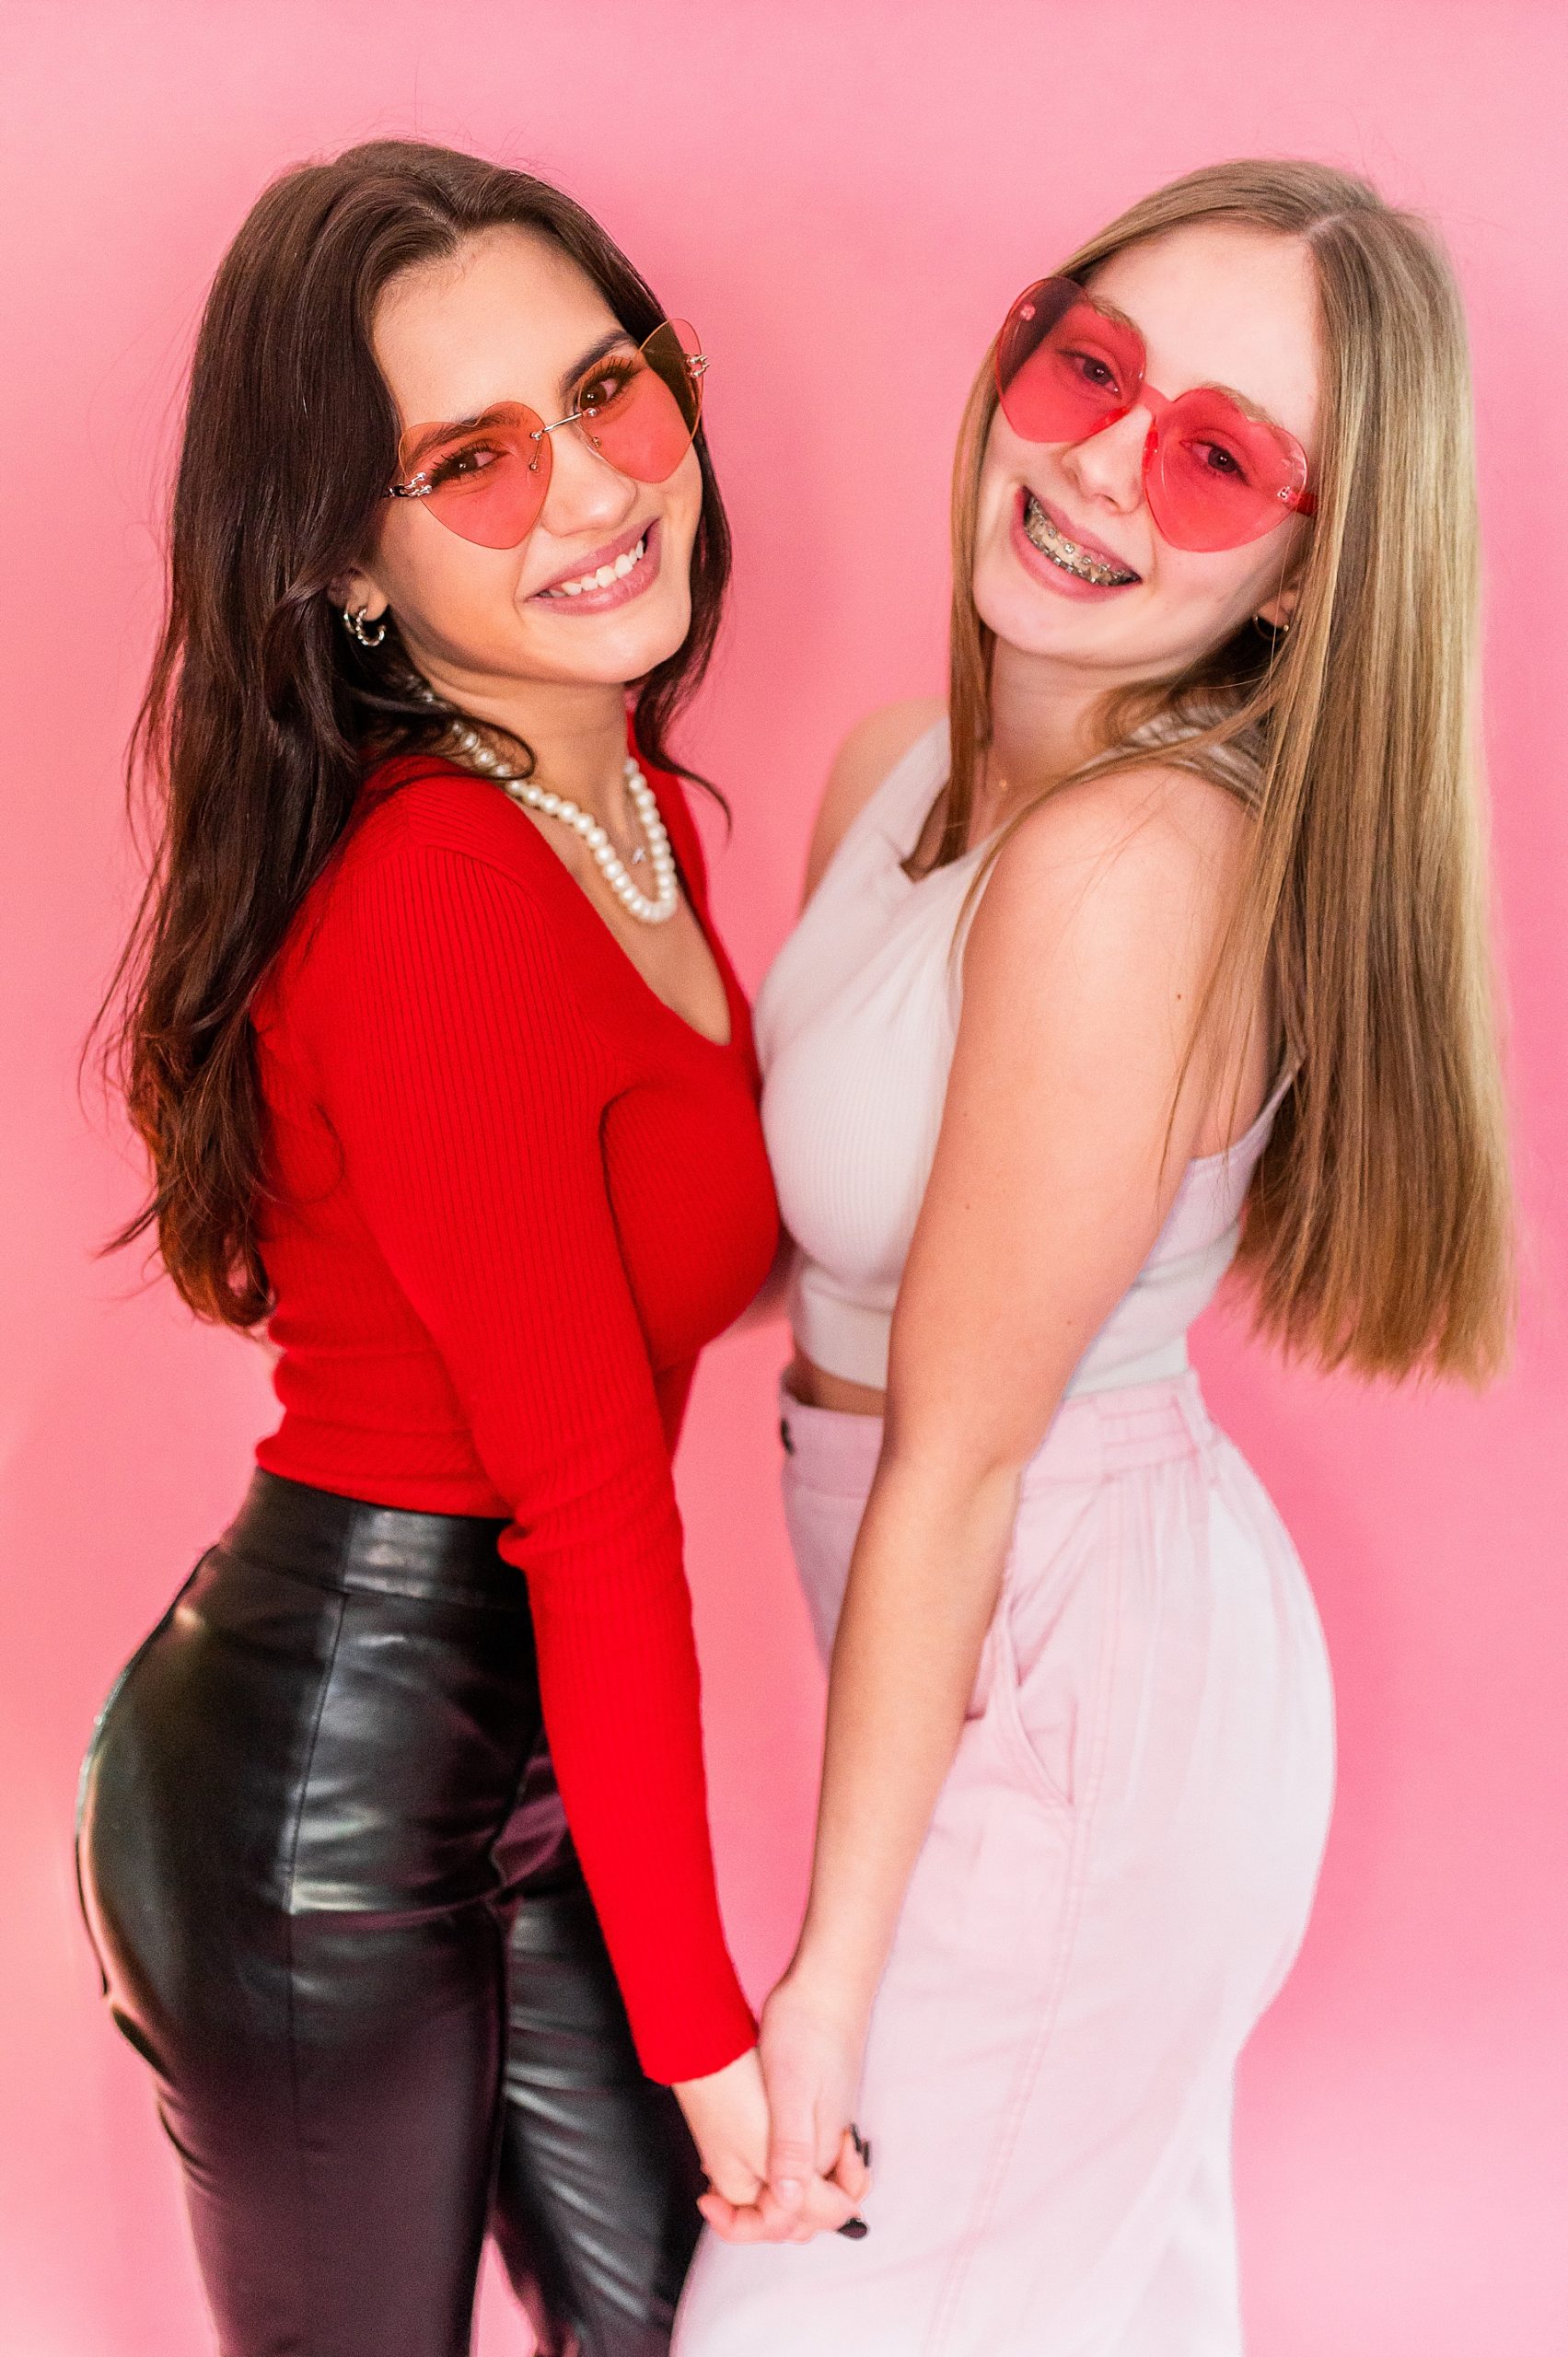 friends on the ACP senior Spokesmodel team pose together in red heart shaped glasses